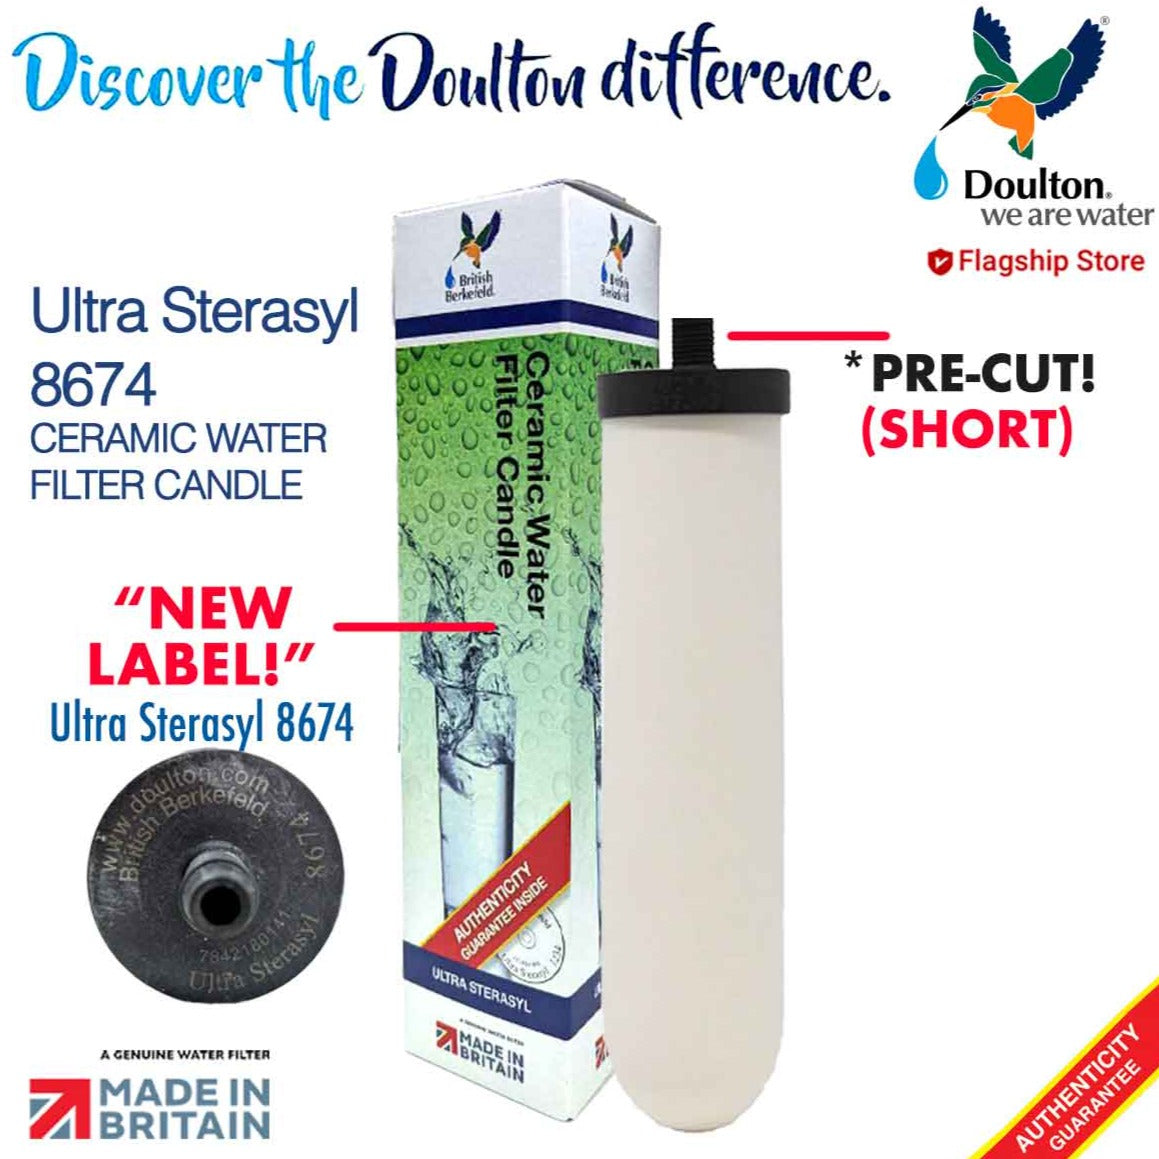 Doulton Ultra Sterasyl 8674 Ceramic Water Filter Candle (NEW LABEL) of ATC Super Sterasyl